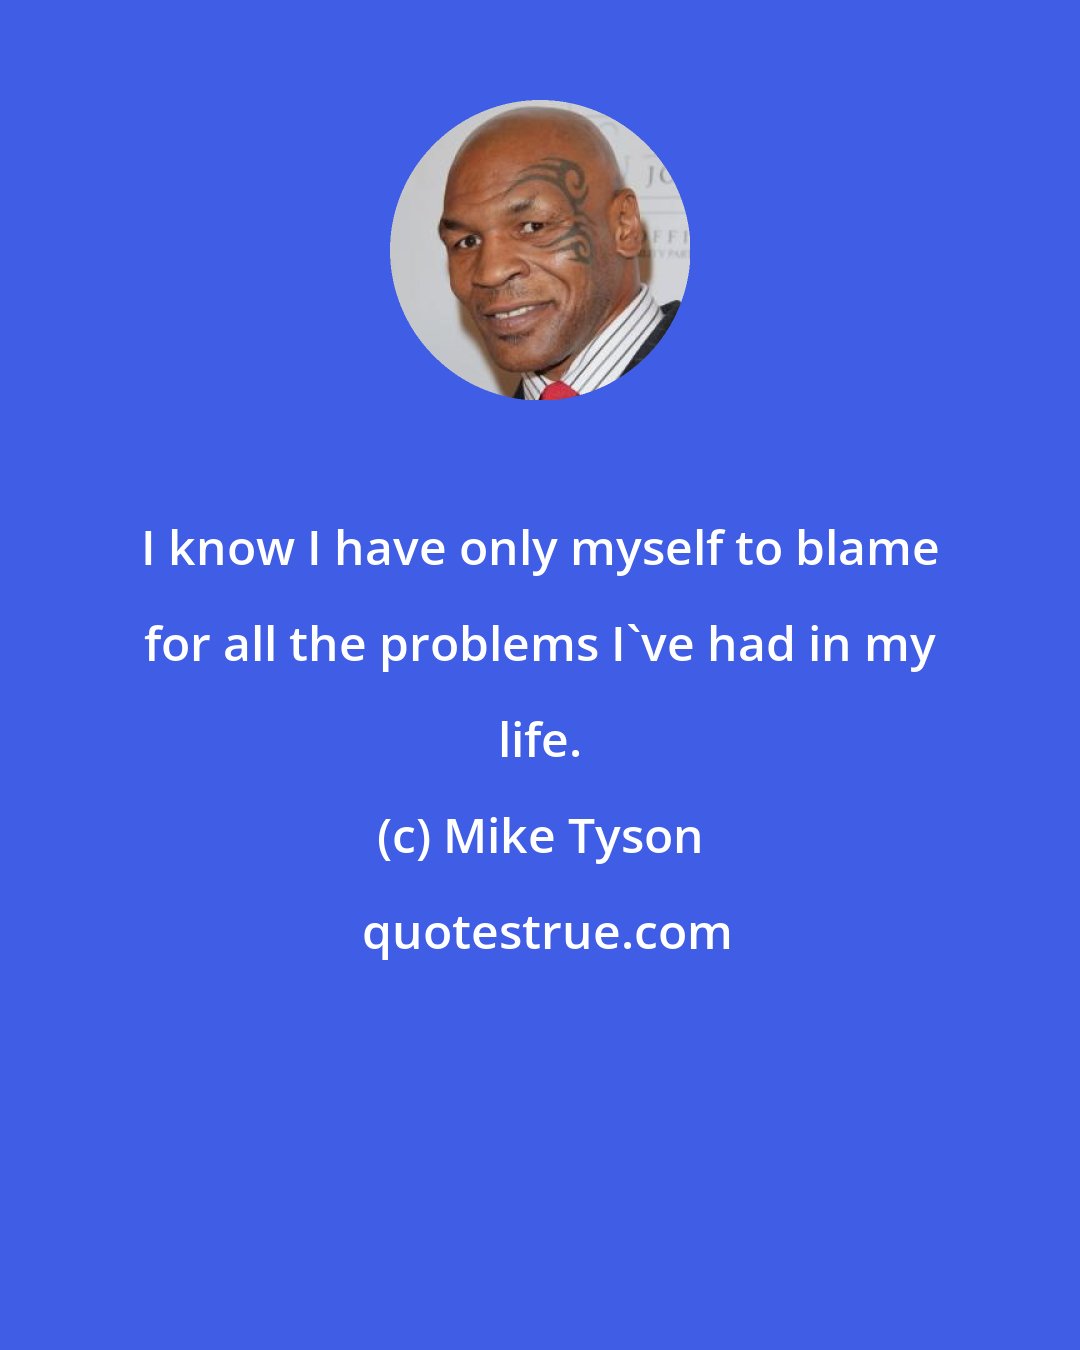 Mike Tyson: I know I have only myself to blame for all the problems I've had in my life.